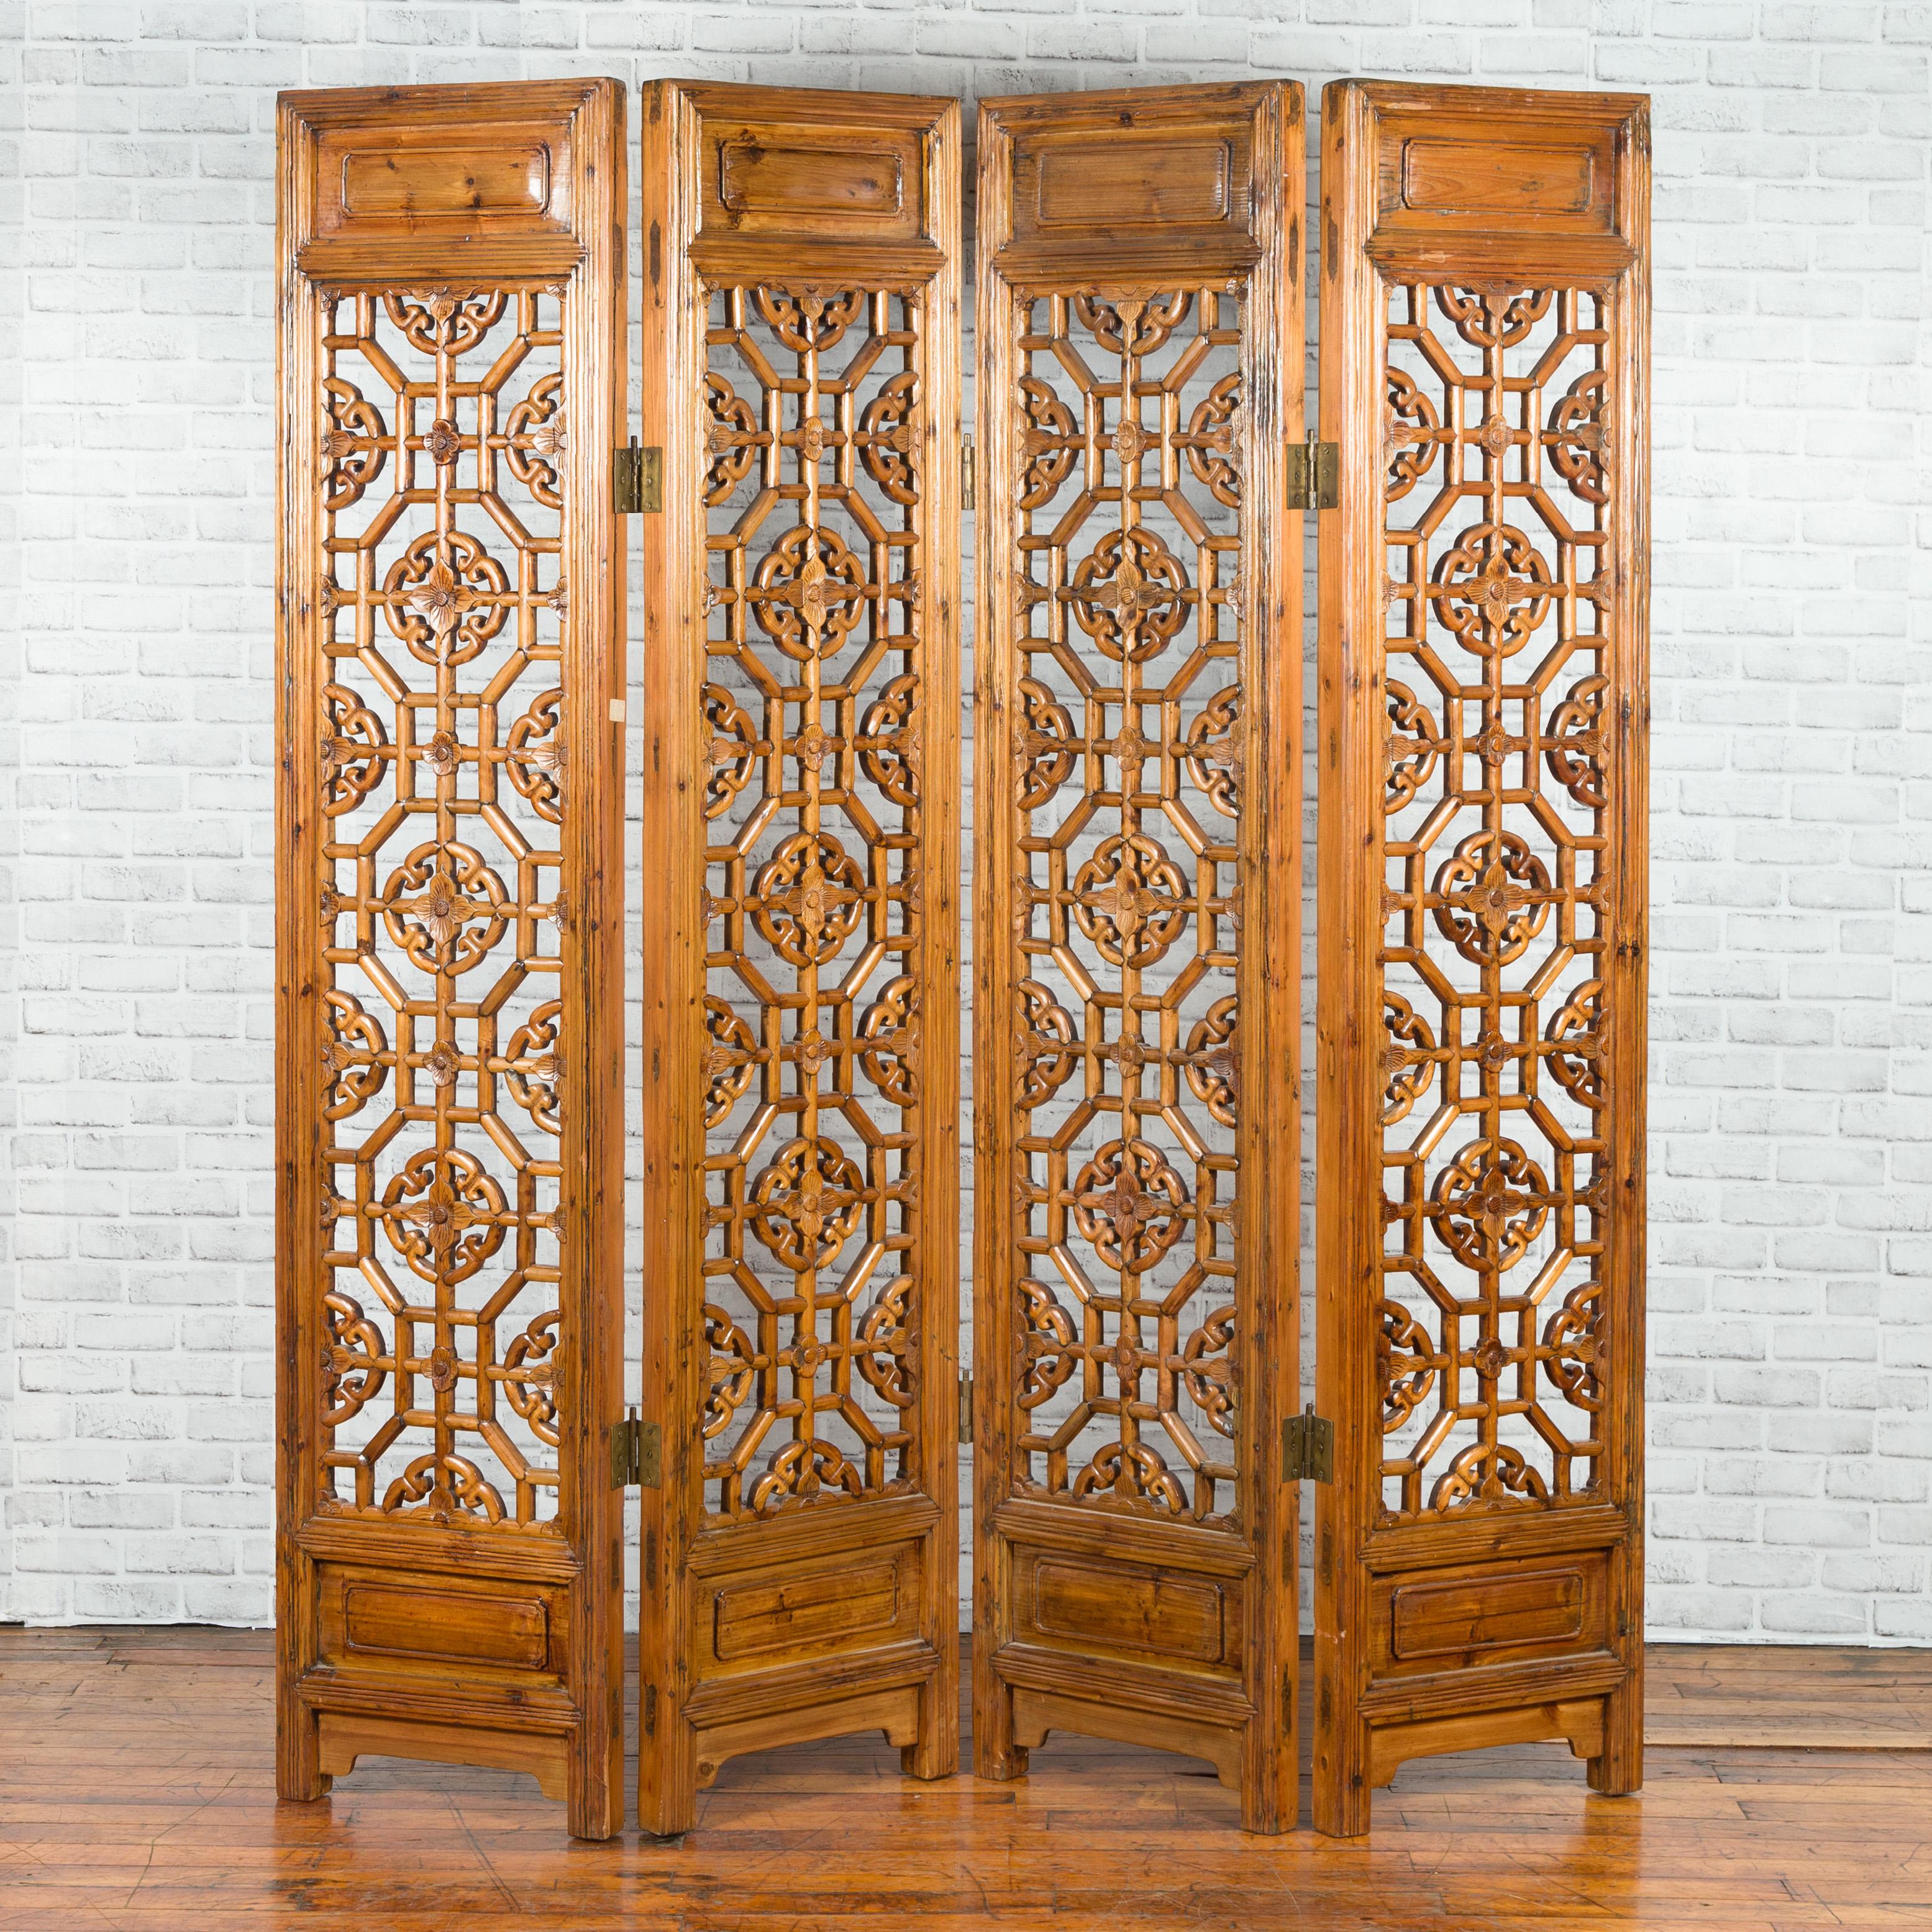 A Chinese fretwork four-panel screen from the early 20th century, with geometric motifs and floral accents. Created in China during the early years of the 20th century, this wooden screens features four vertical fretworks panels adorned with